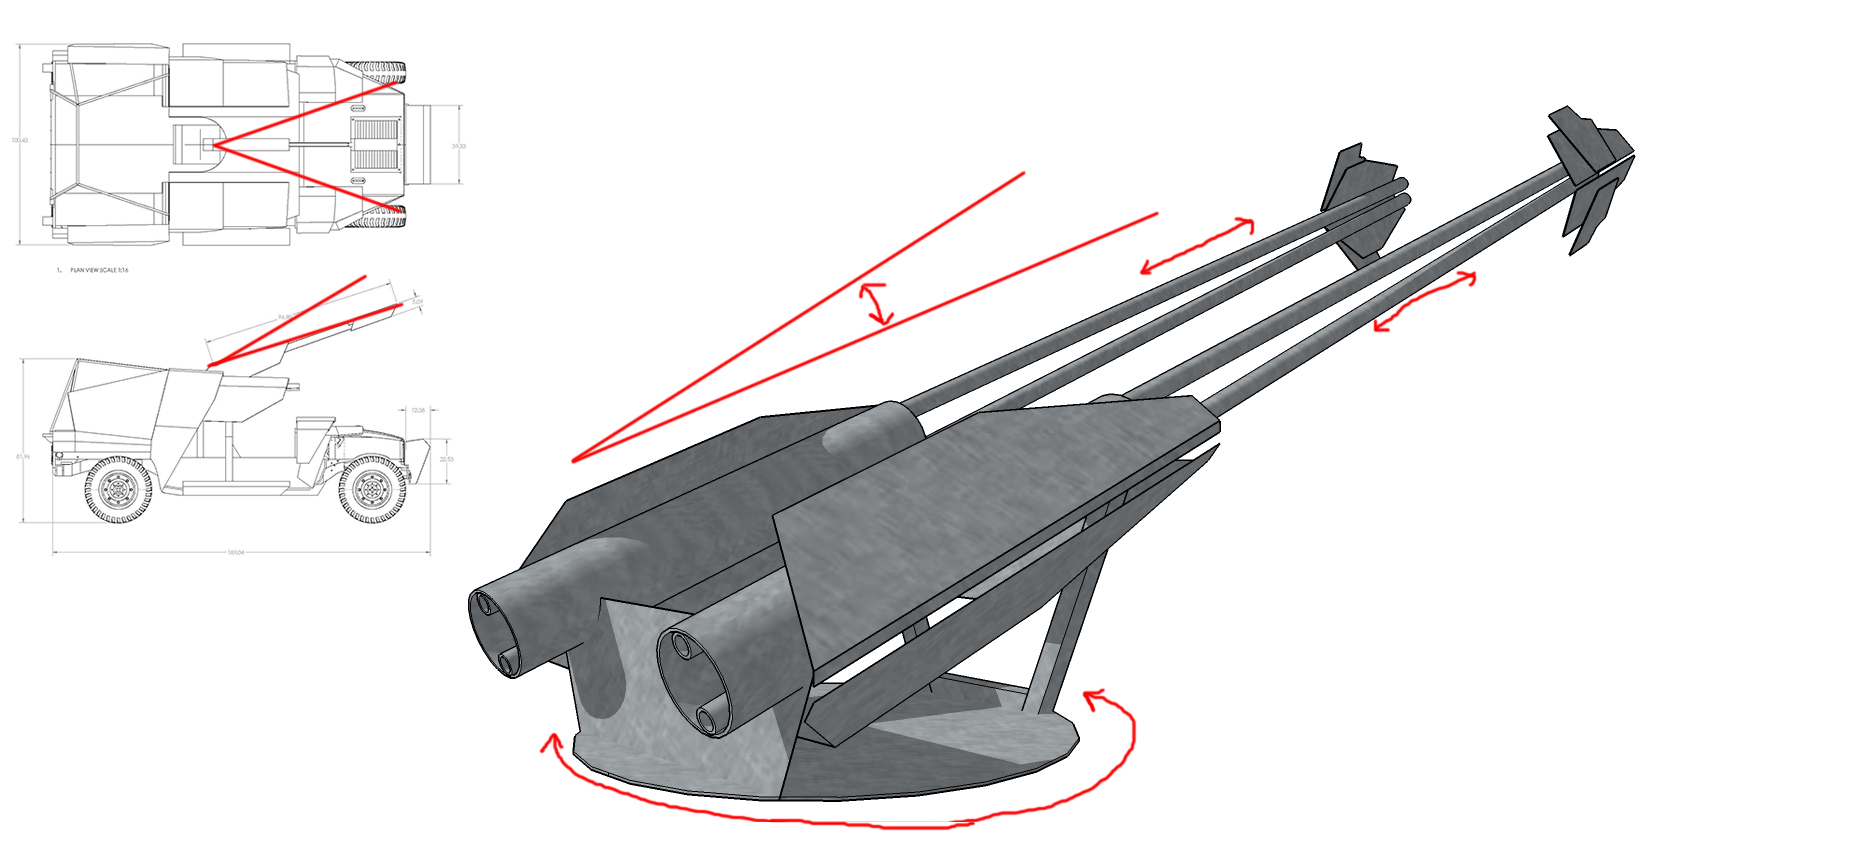  The cannon turret was designed to rotate left and right as well as move from an initial horizontal position upward before firing. 